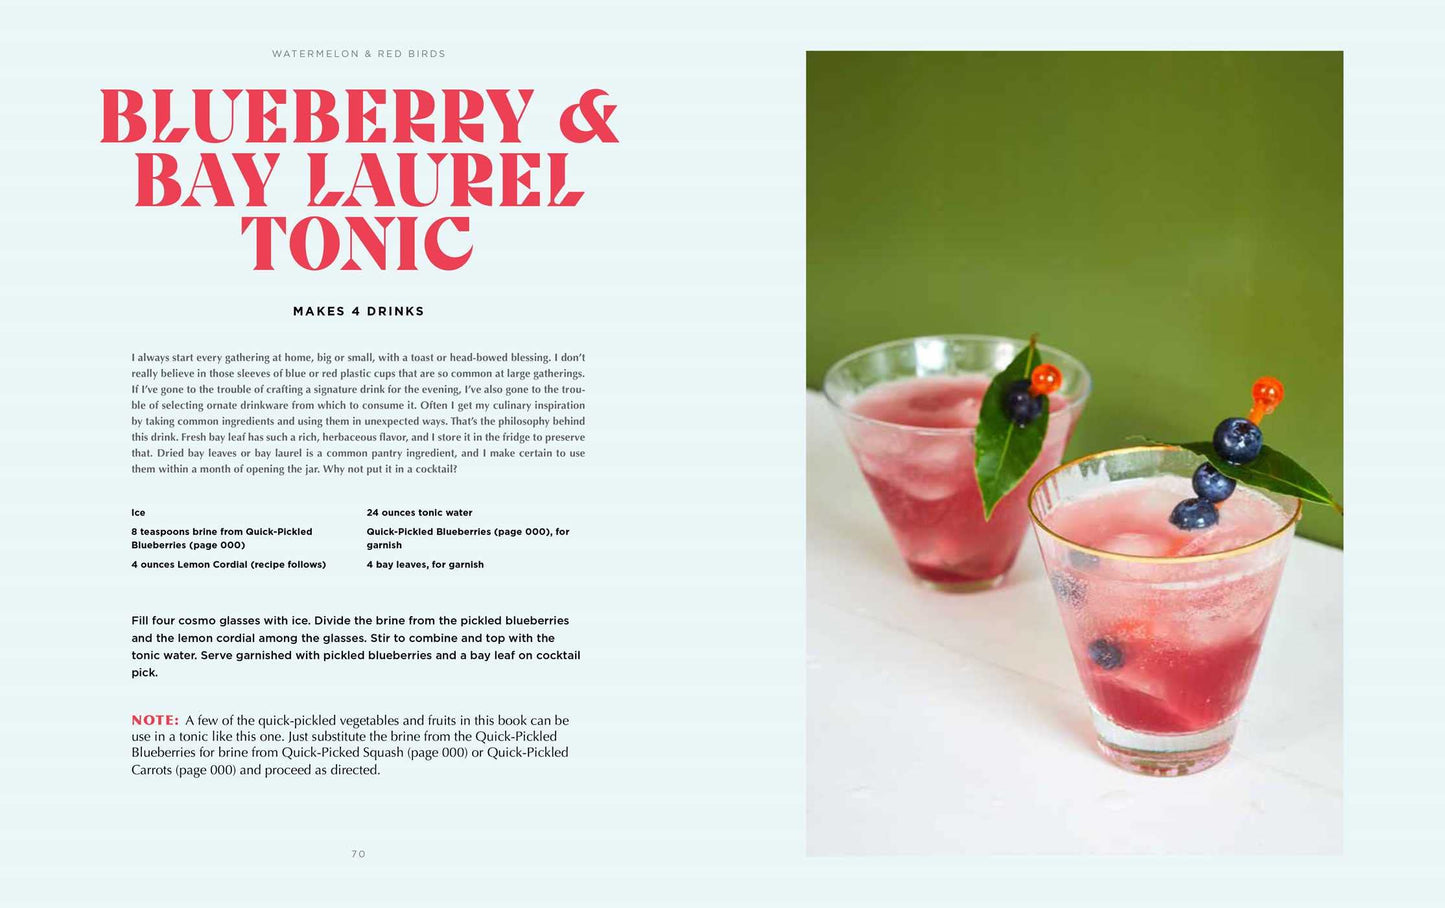 Watermelon and Red Birds // A Cookbook for Juneteenth and Black Celebrations